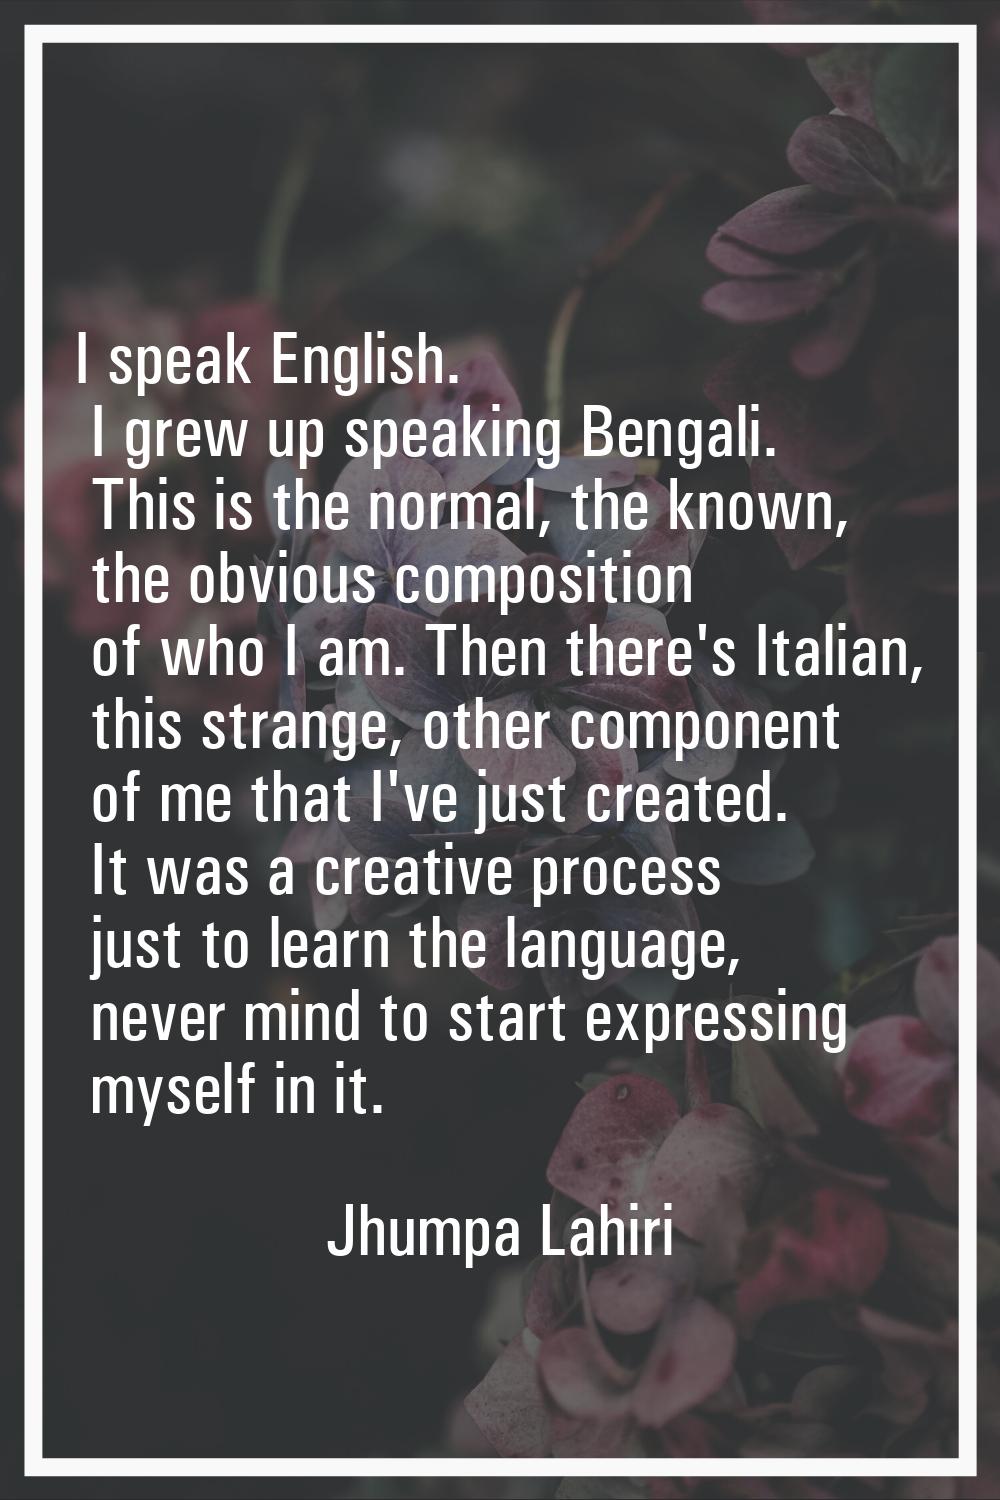 I speak English. I grew up speaking Bengali. This is the normal, the known, the obvious composition